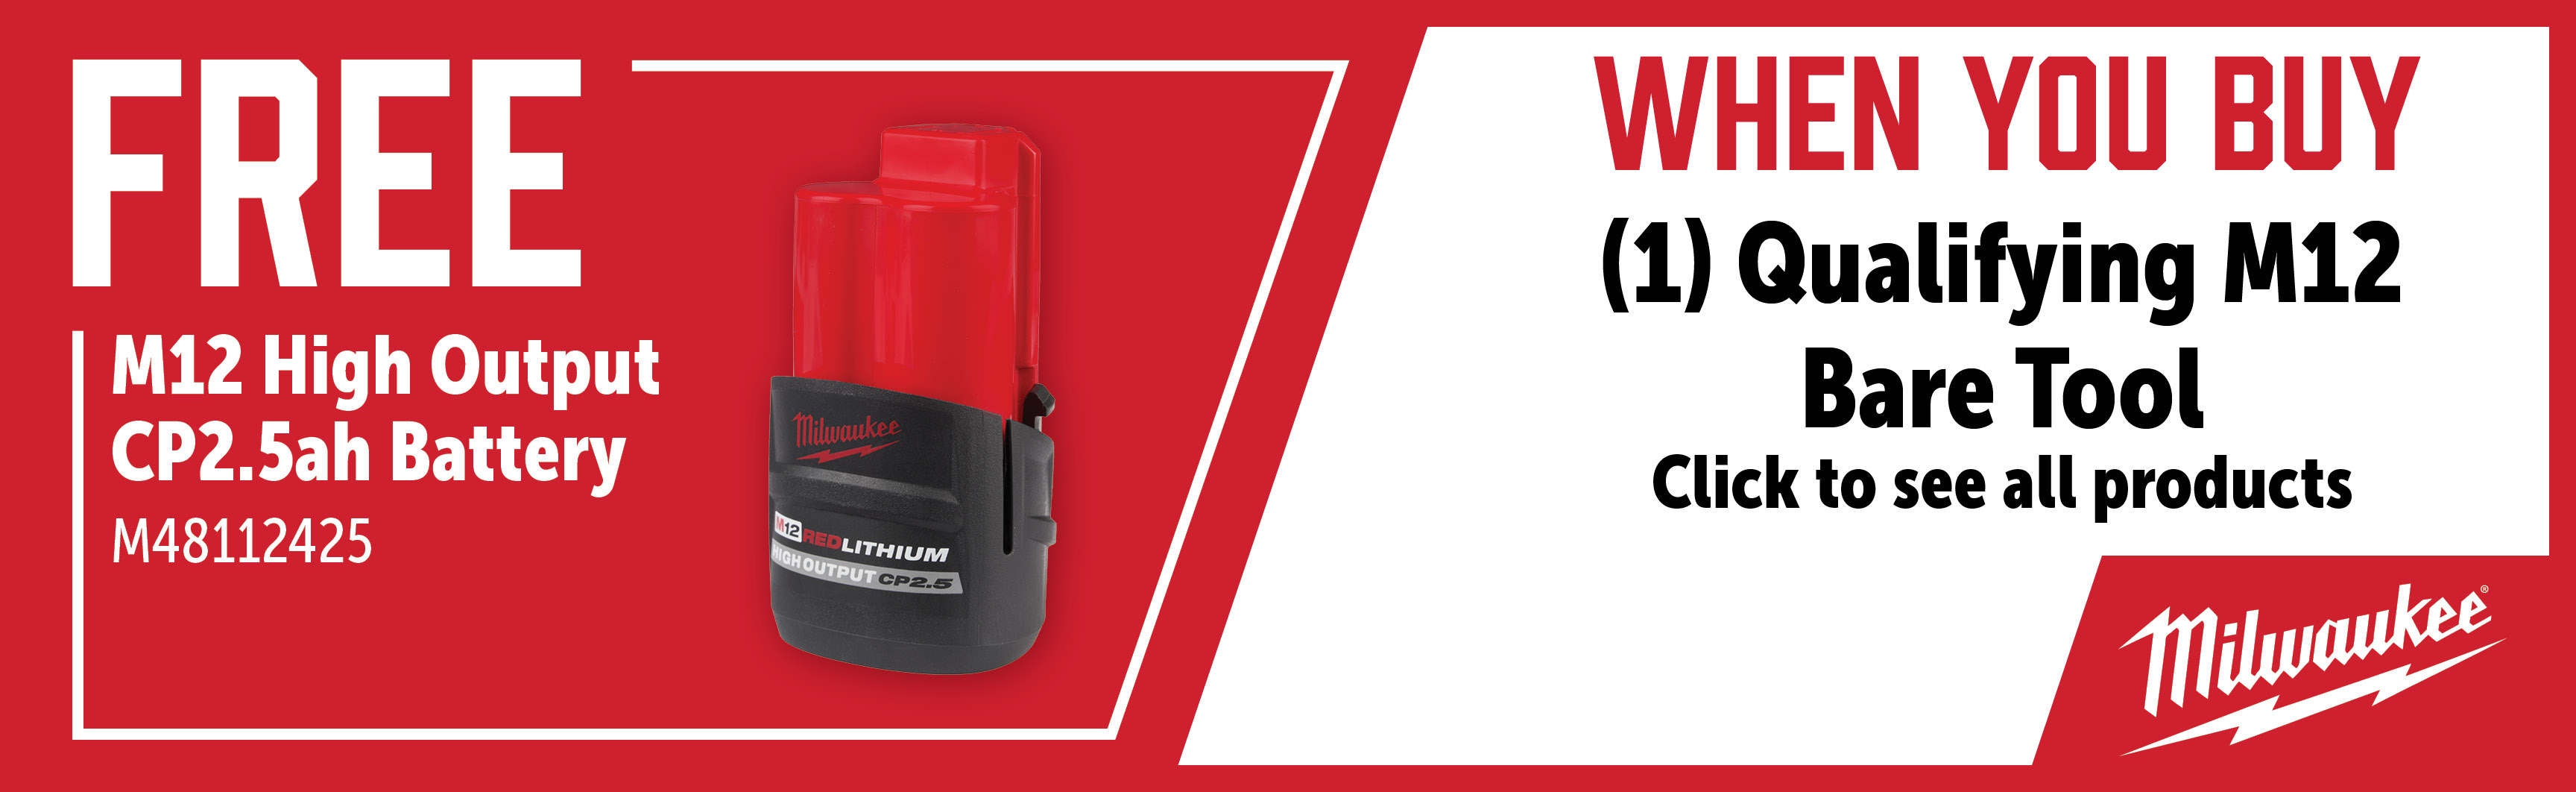 Milwaukee Feb-Apr: Buy a Qualifying M12 Fuel Bare Tool and Get a FREE M48112425